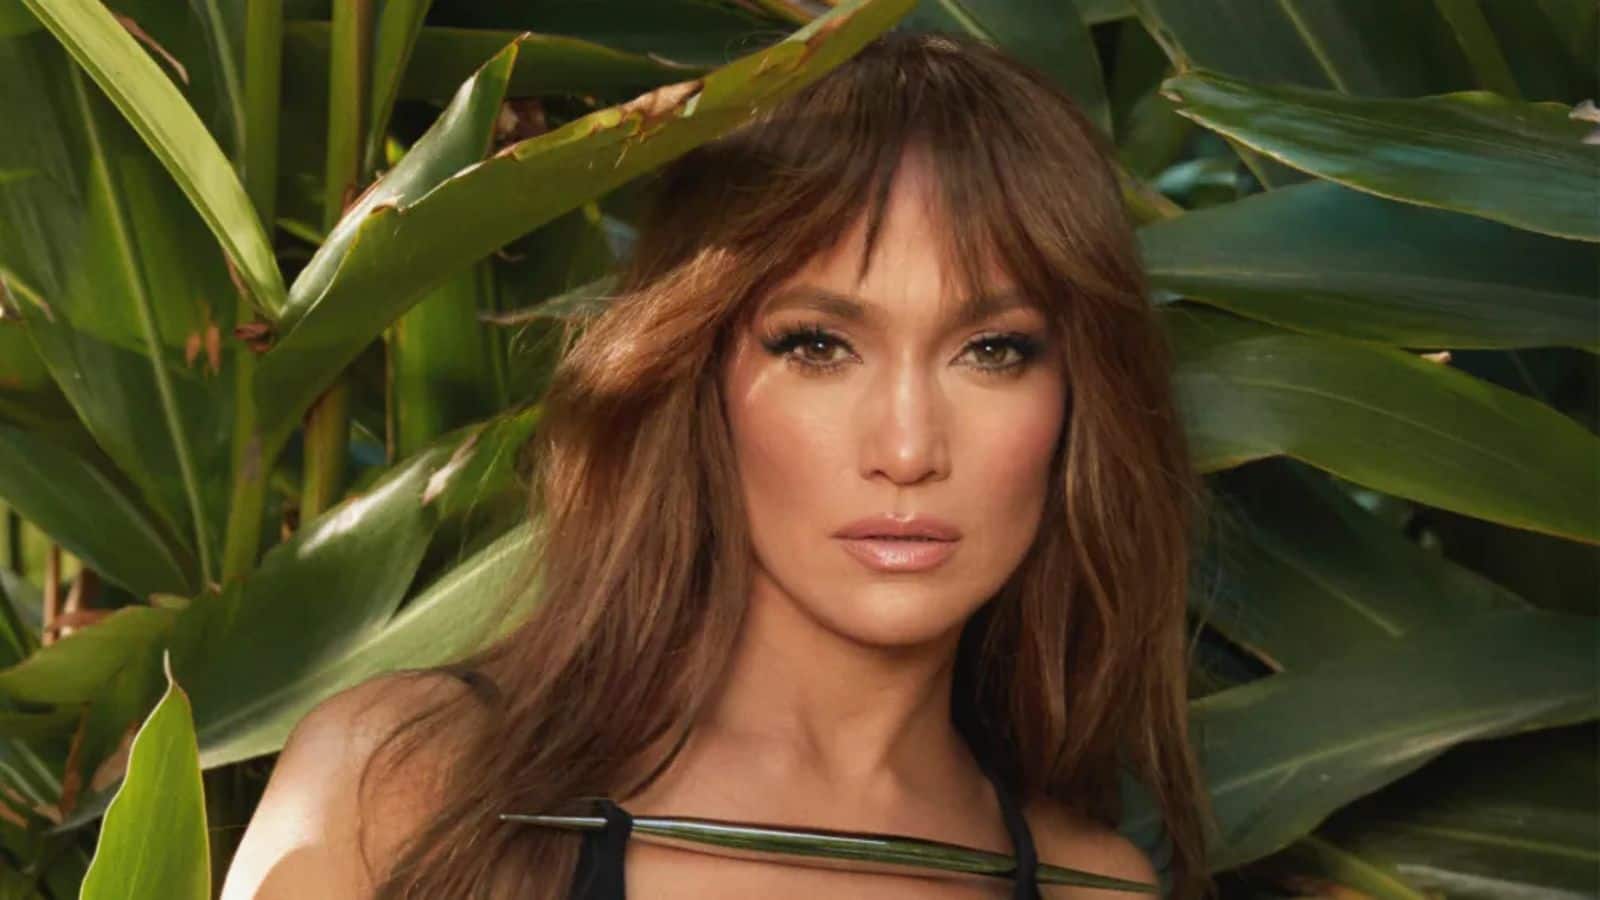 JLo's 'This Is Me...Now' tour gets rebranded amid low sales